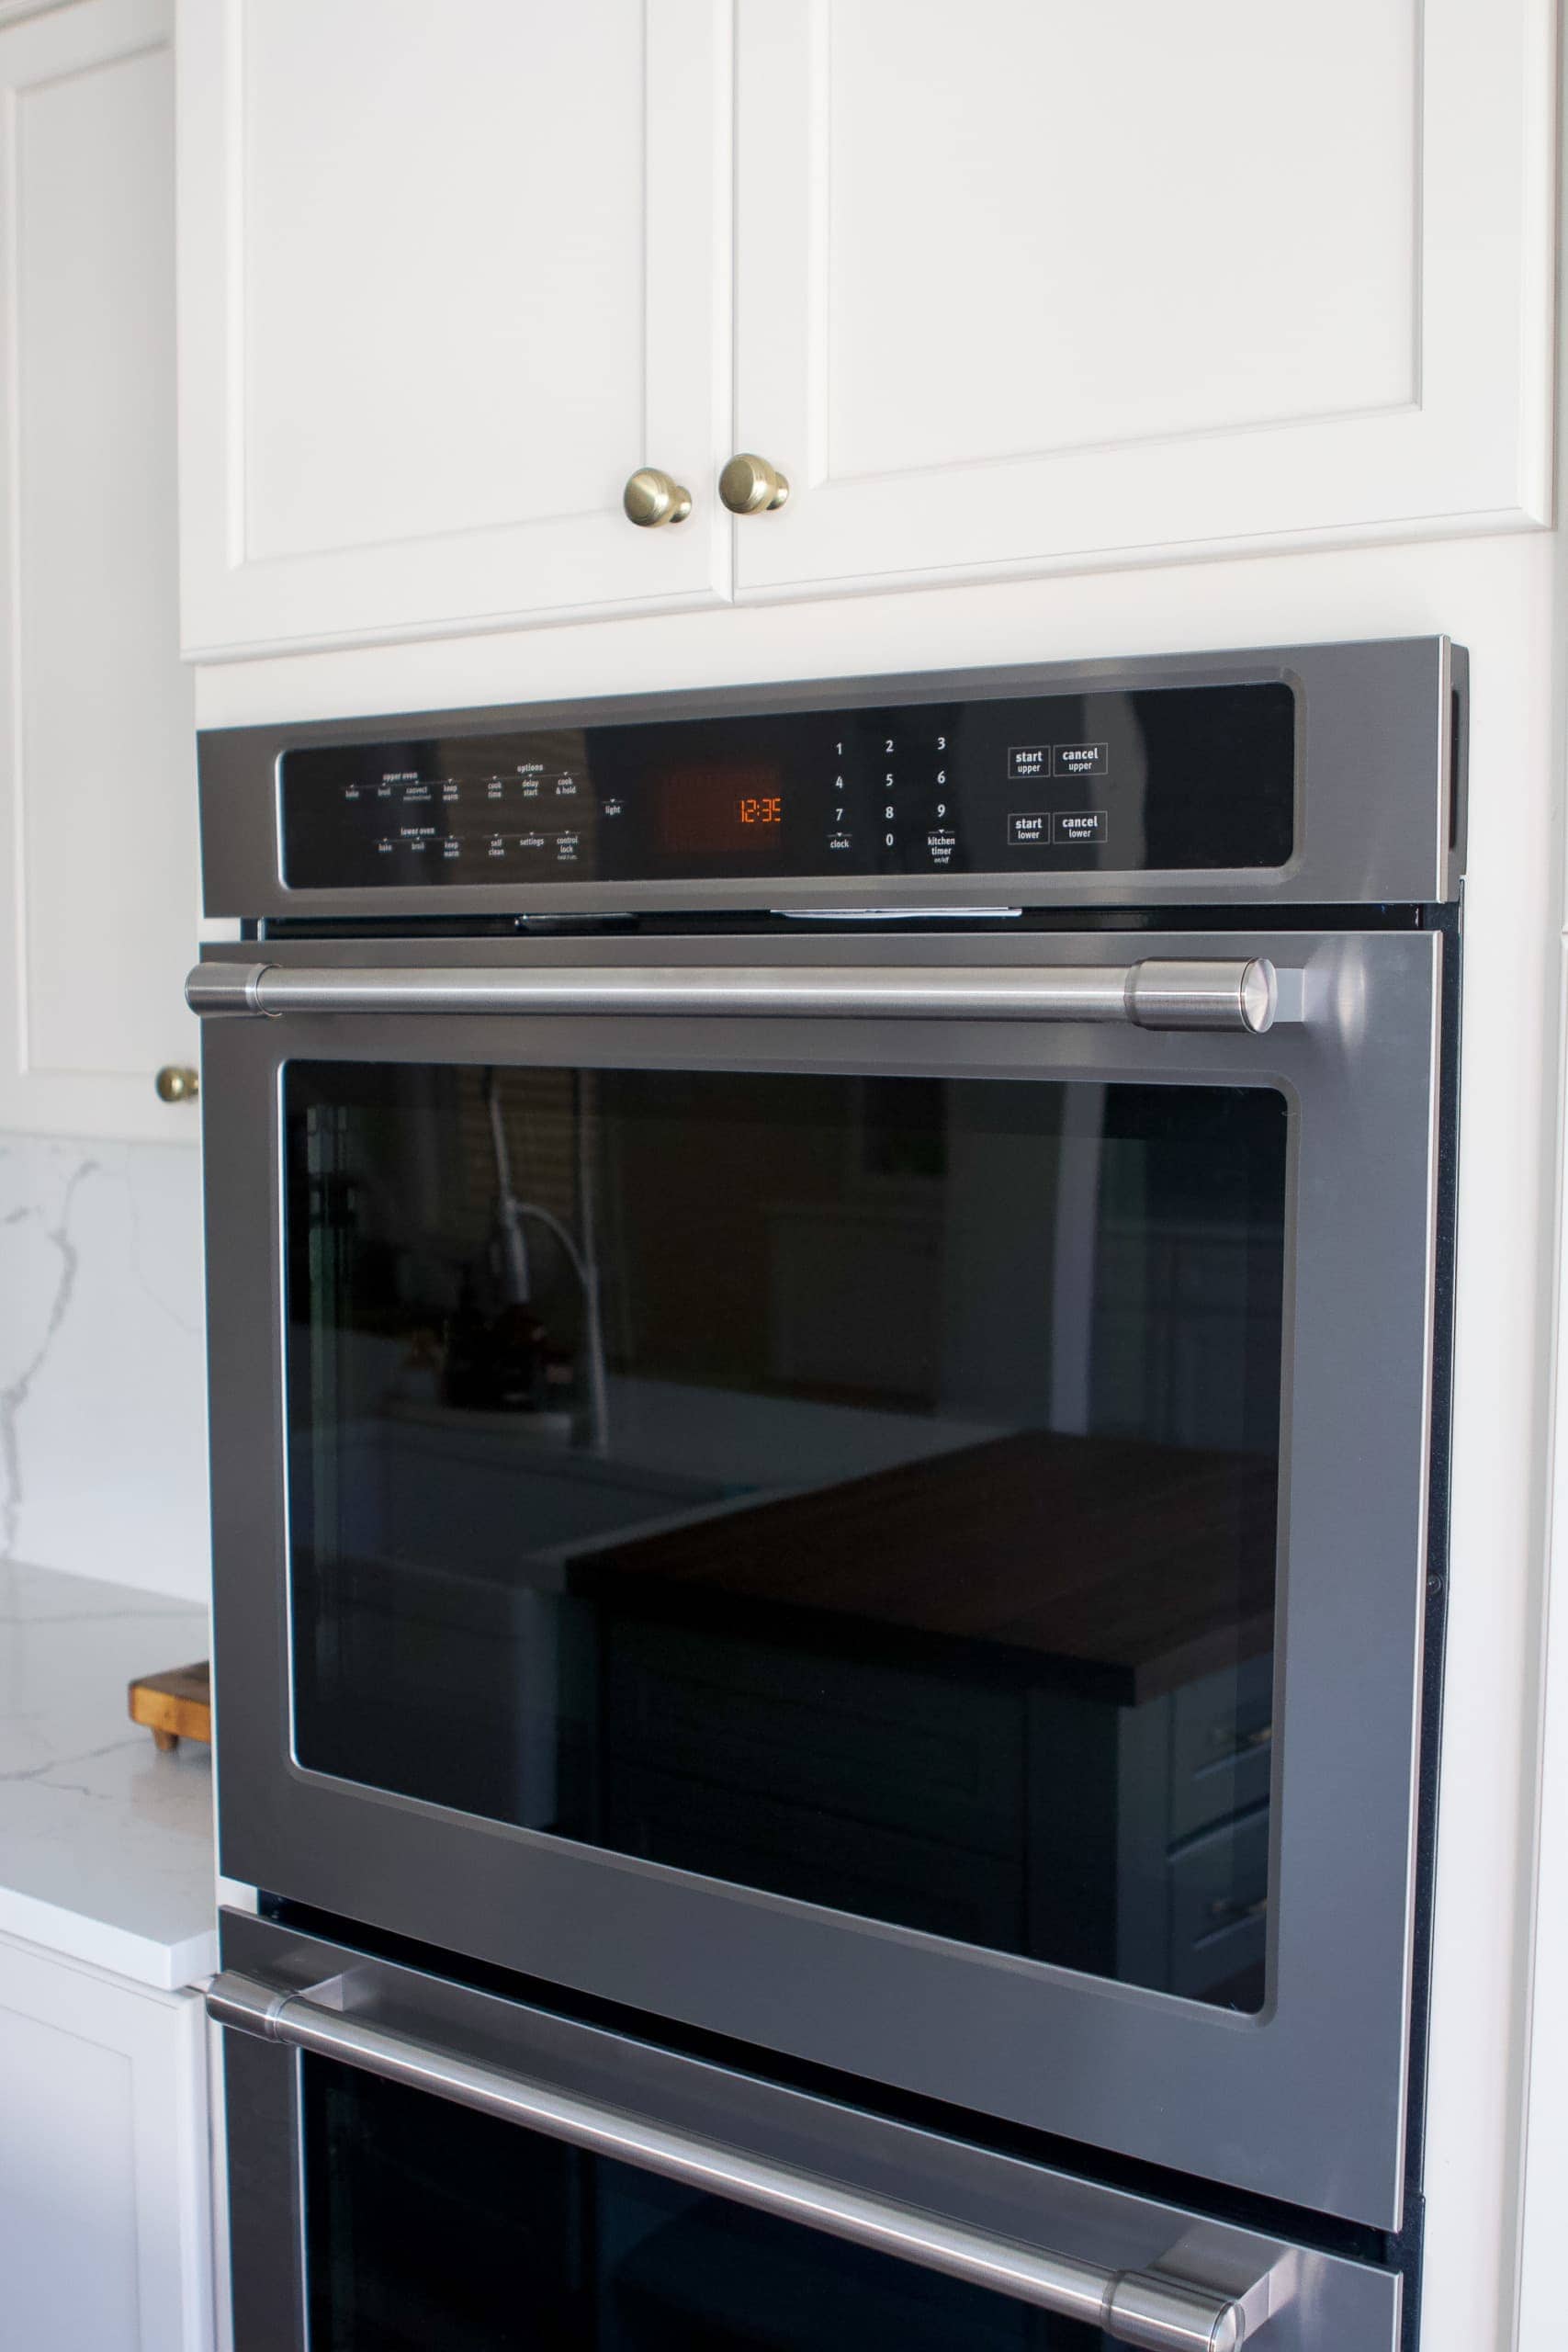 Choosing new kitchen appliances including a Maytag double oven